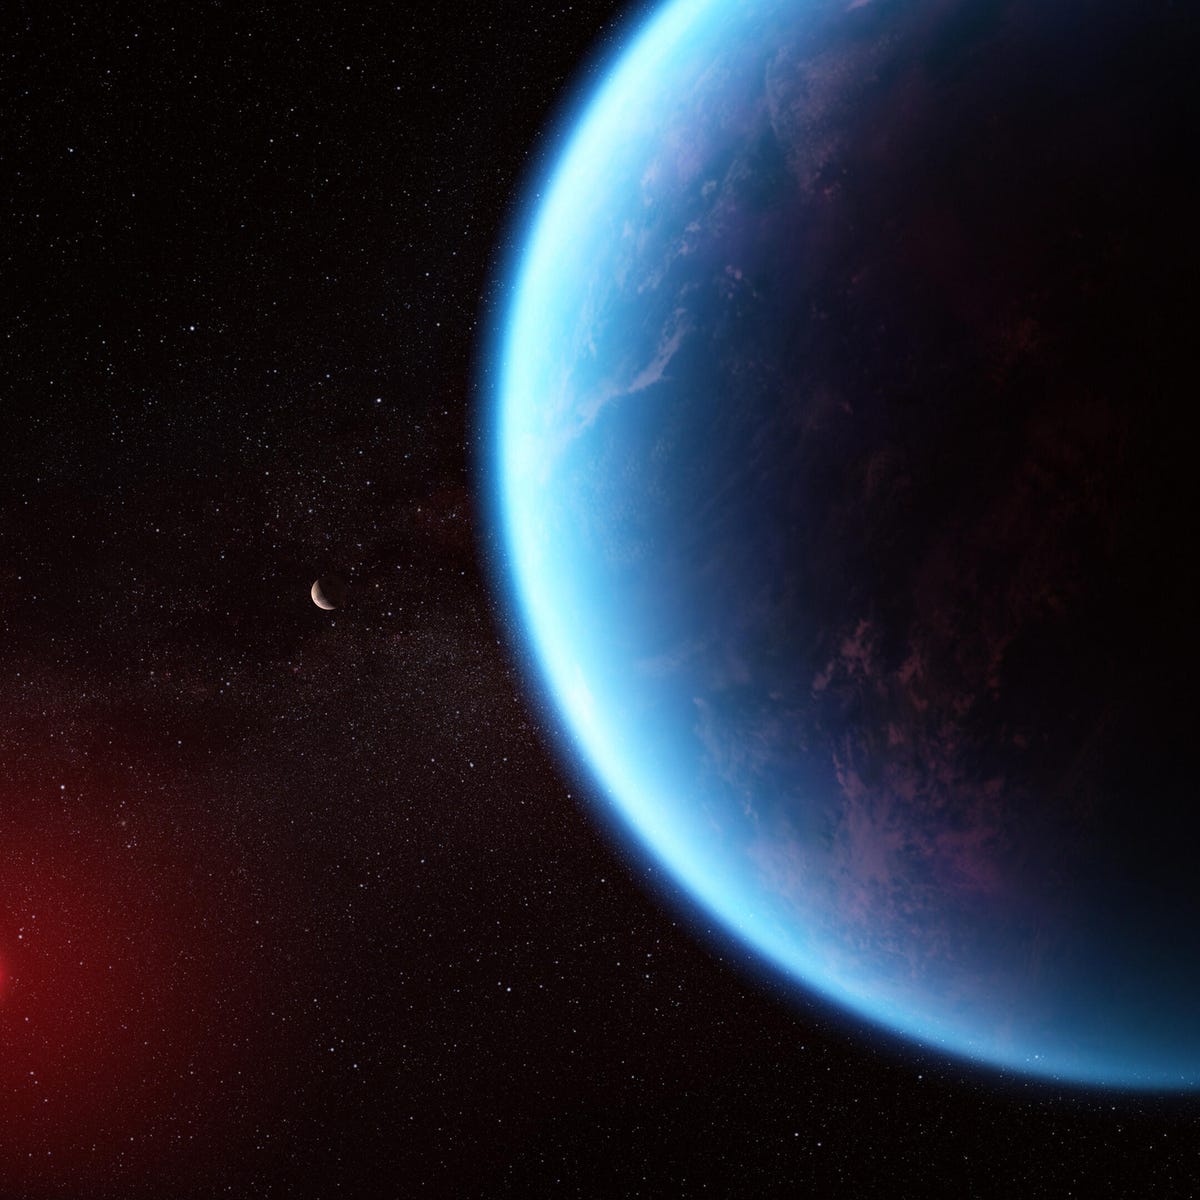 Webb Finds Potentially Habitable Exoplanet Might Be an Ocean World